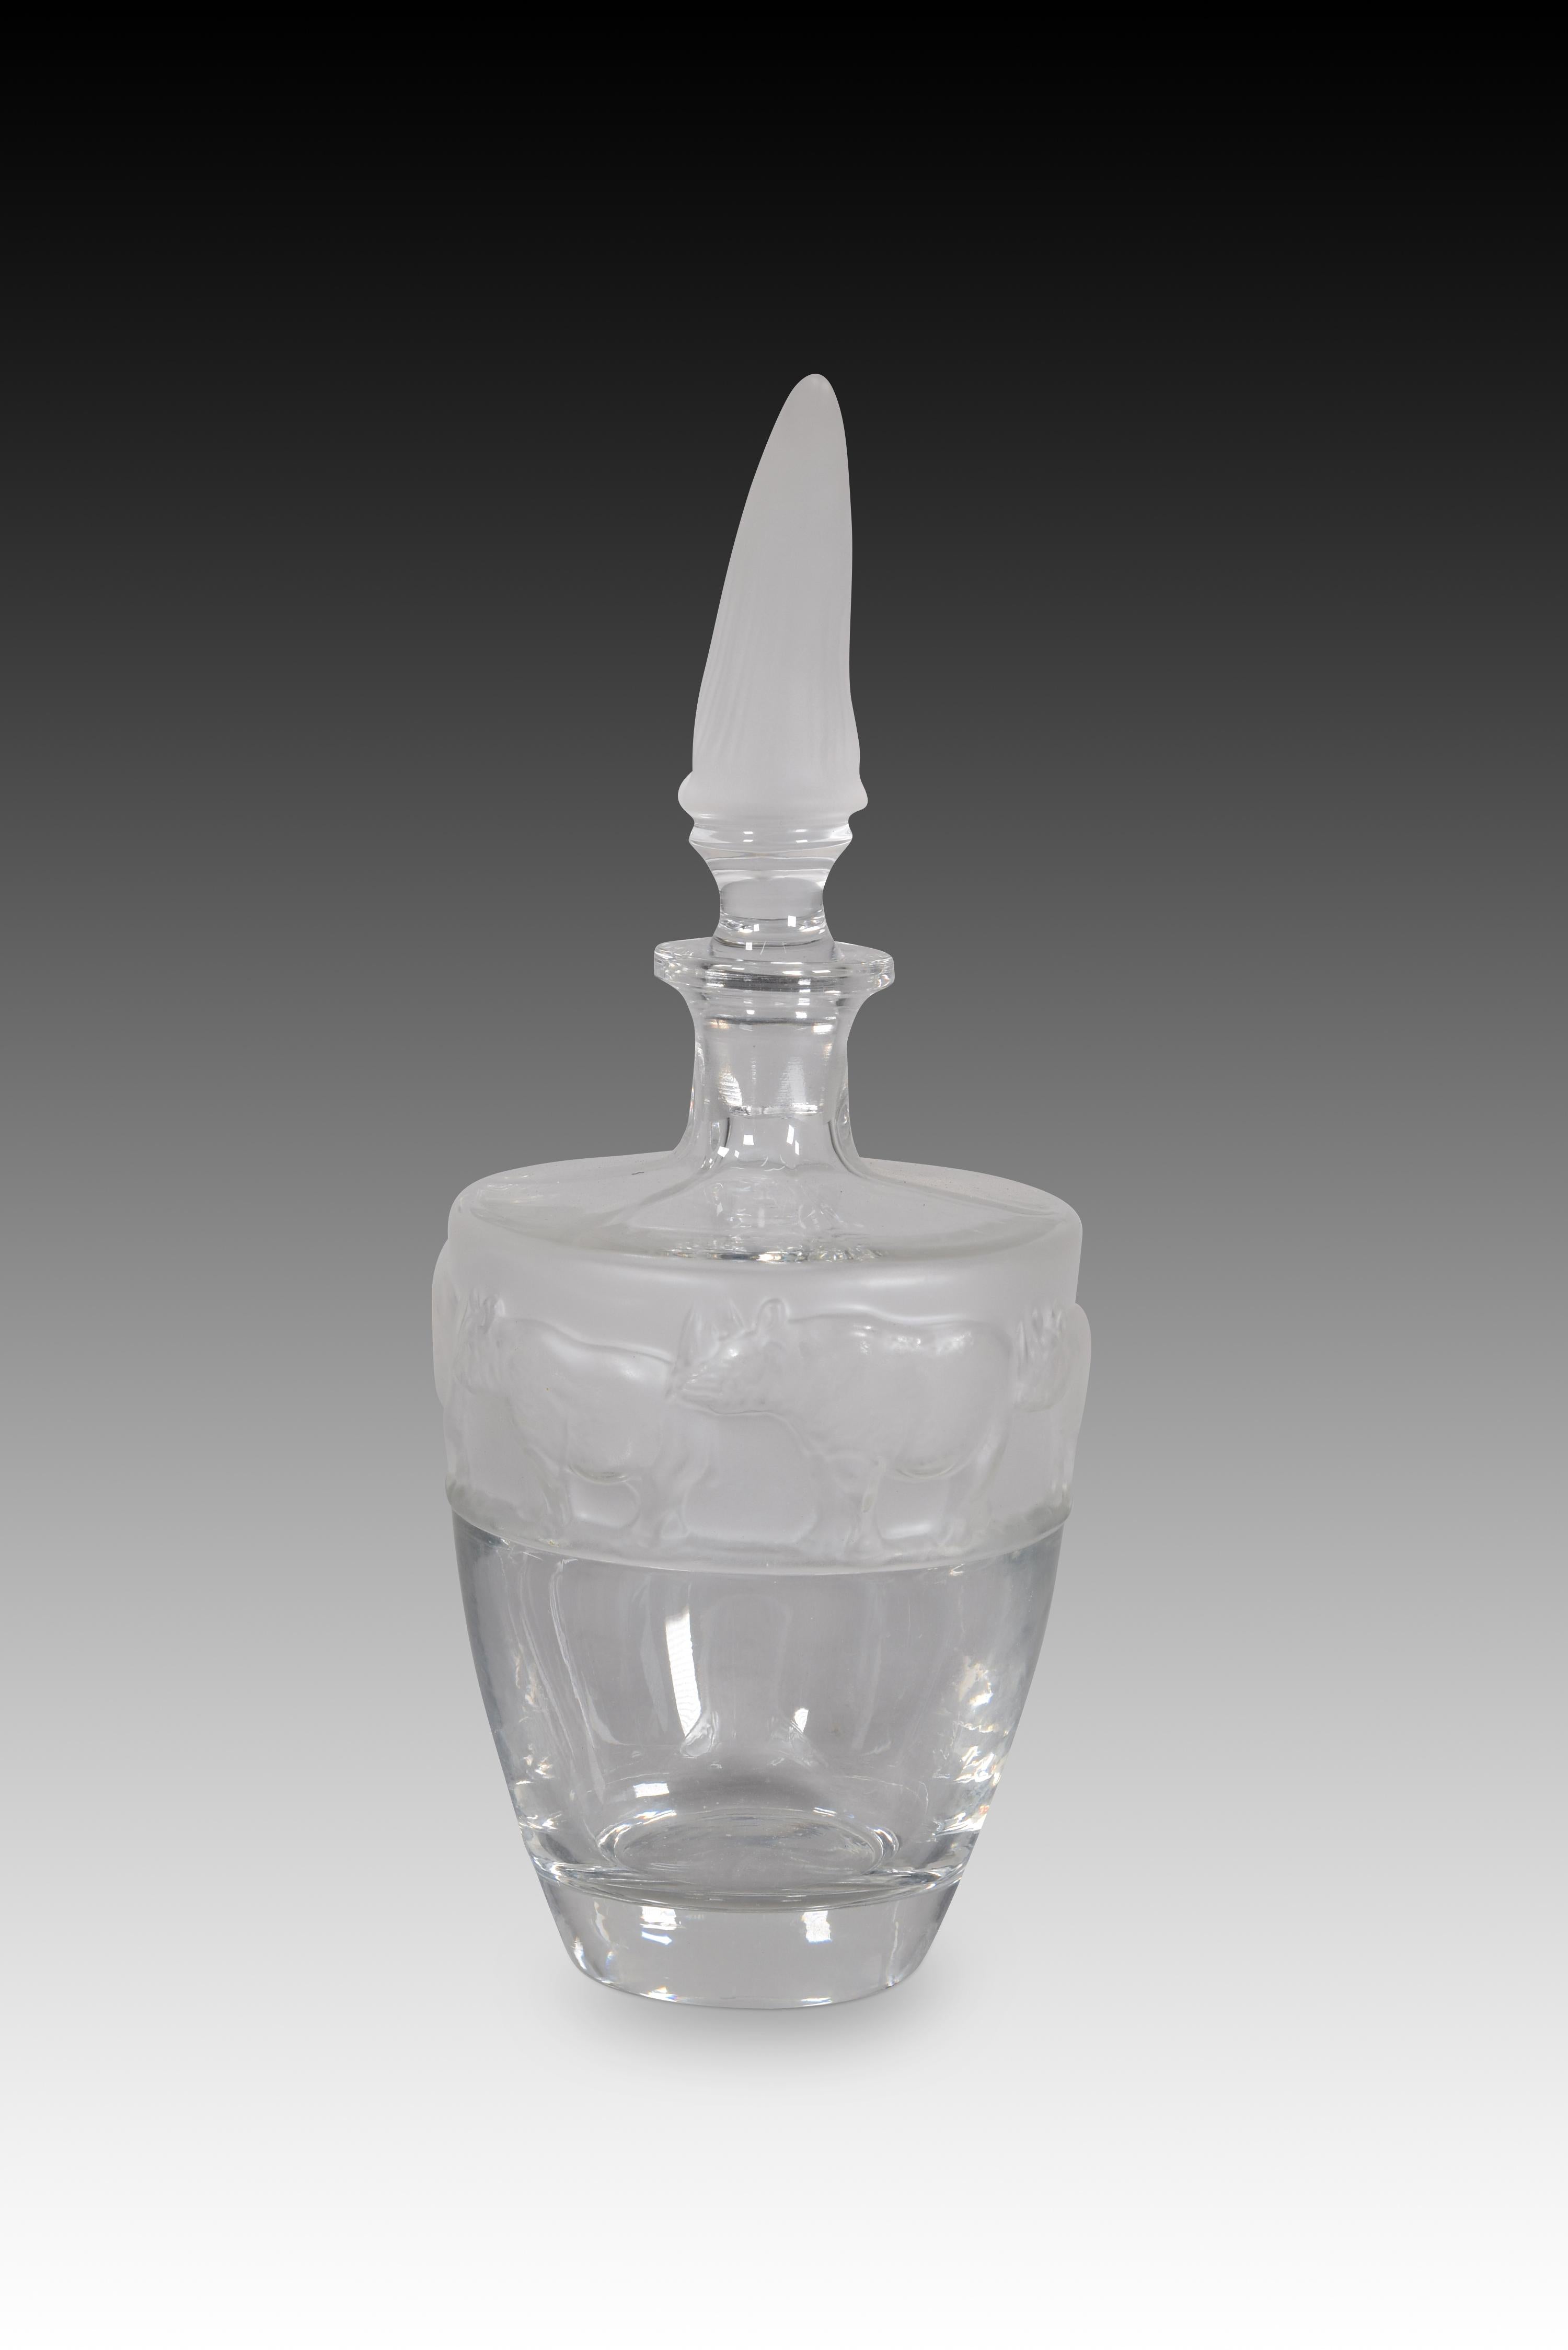 Decanter or bottle, Rhinoceros. Glass. Nachtmann, Germany, 20th century. 
Glass decanter or bottle with a stopper topped with a rhinoceros horn shape and a decoration of black rhinos on the top of the piece. It belongs to the Safari series.